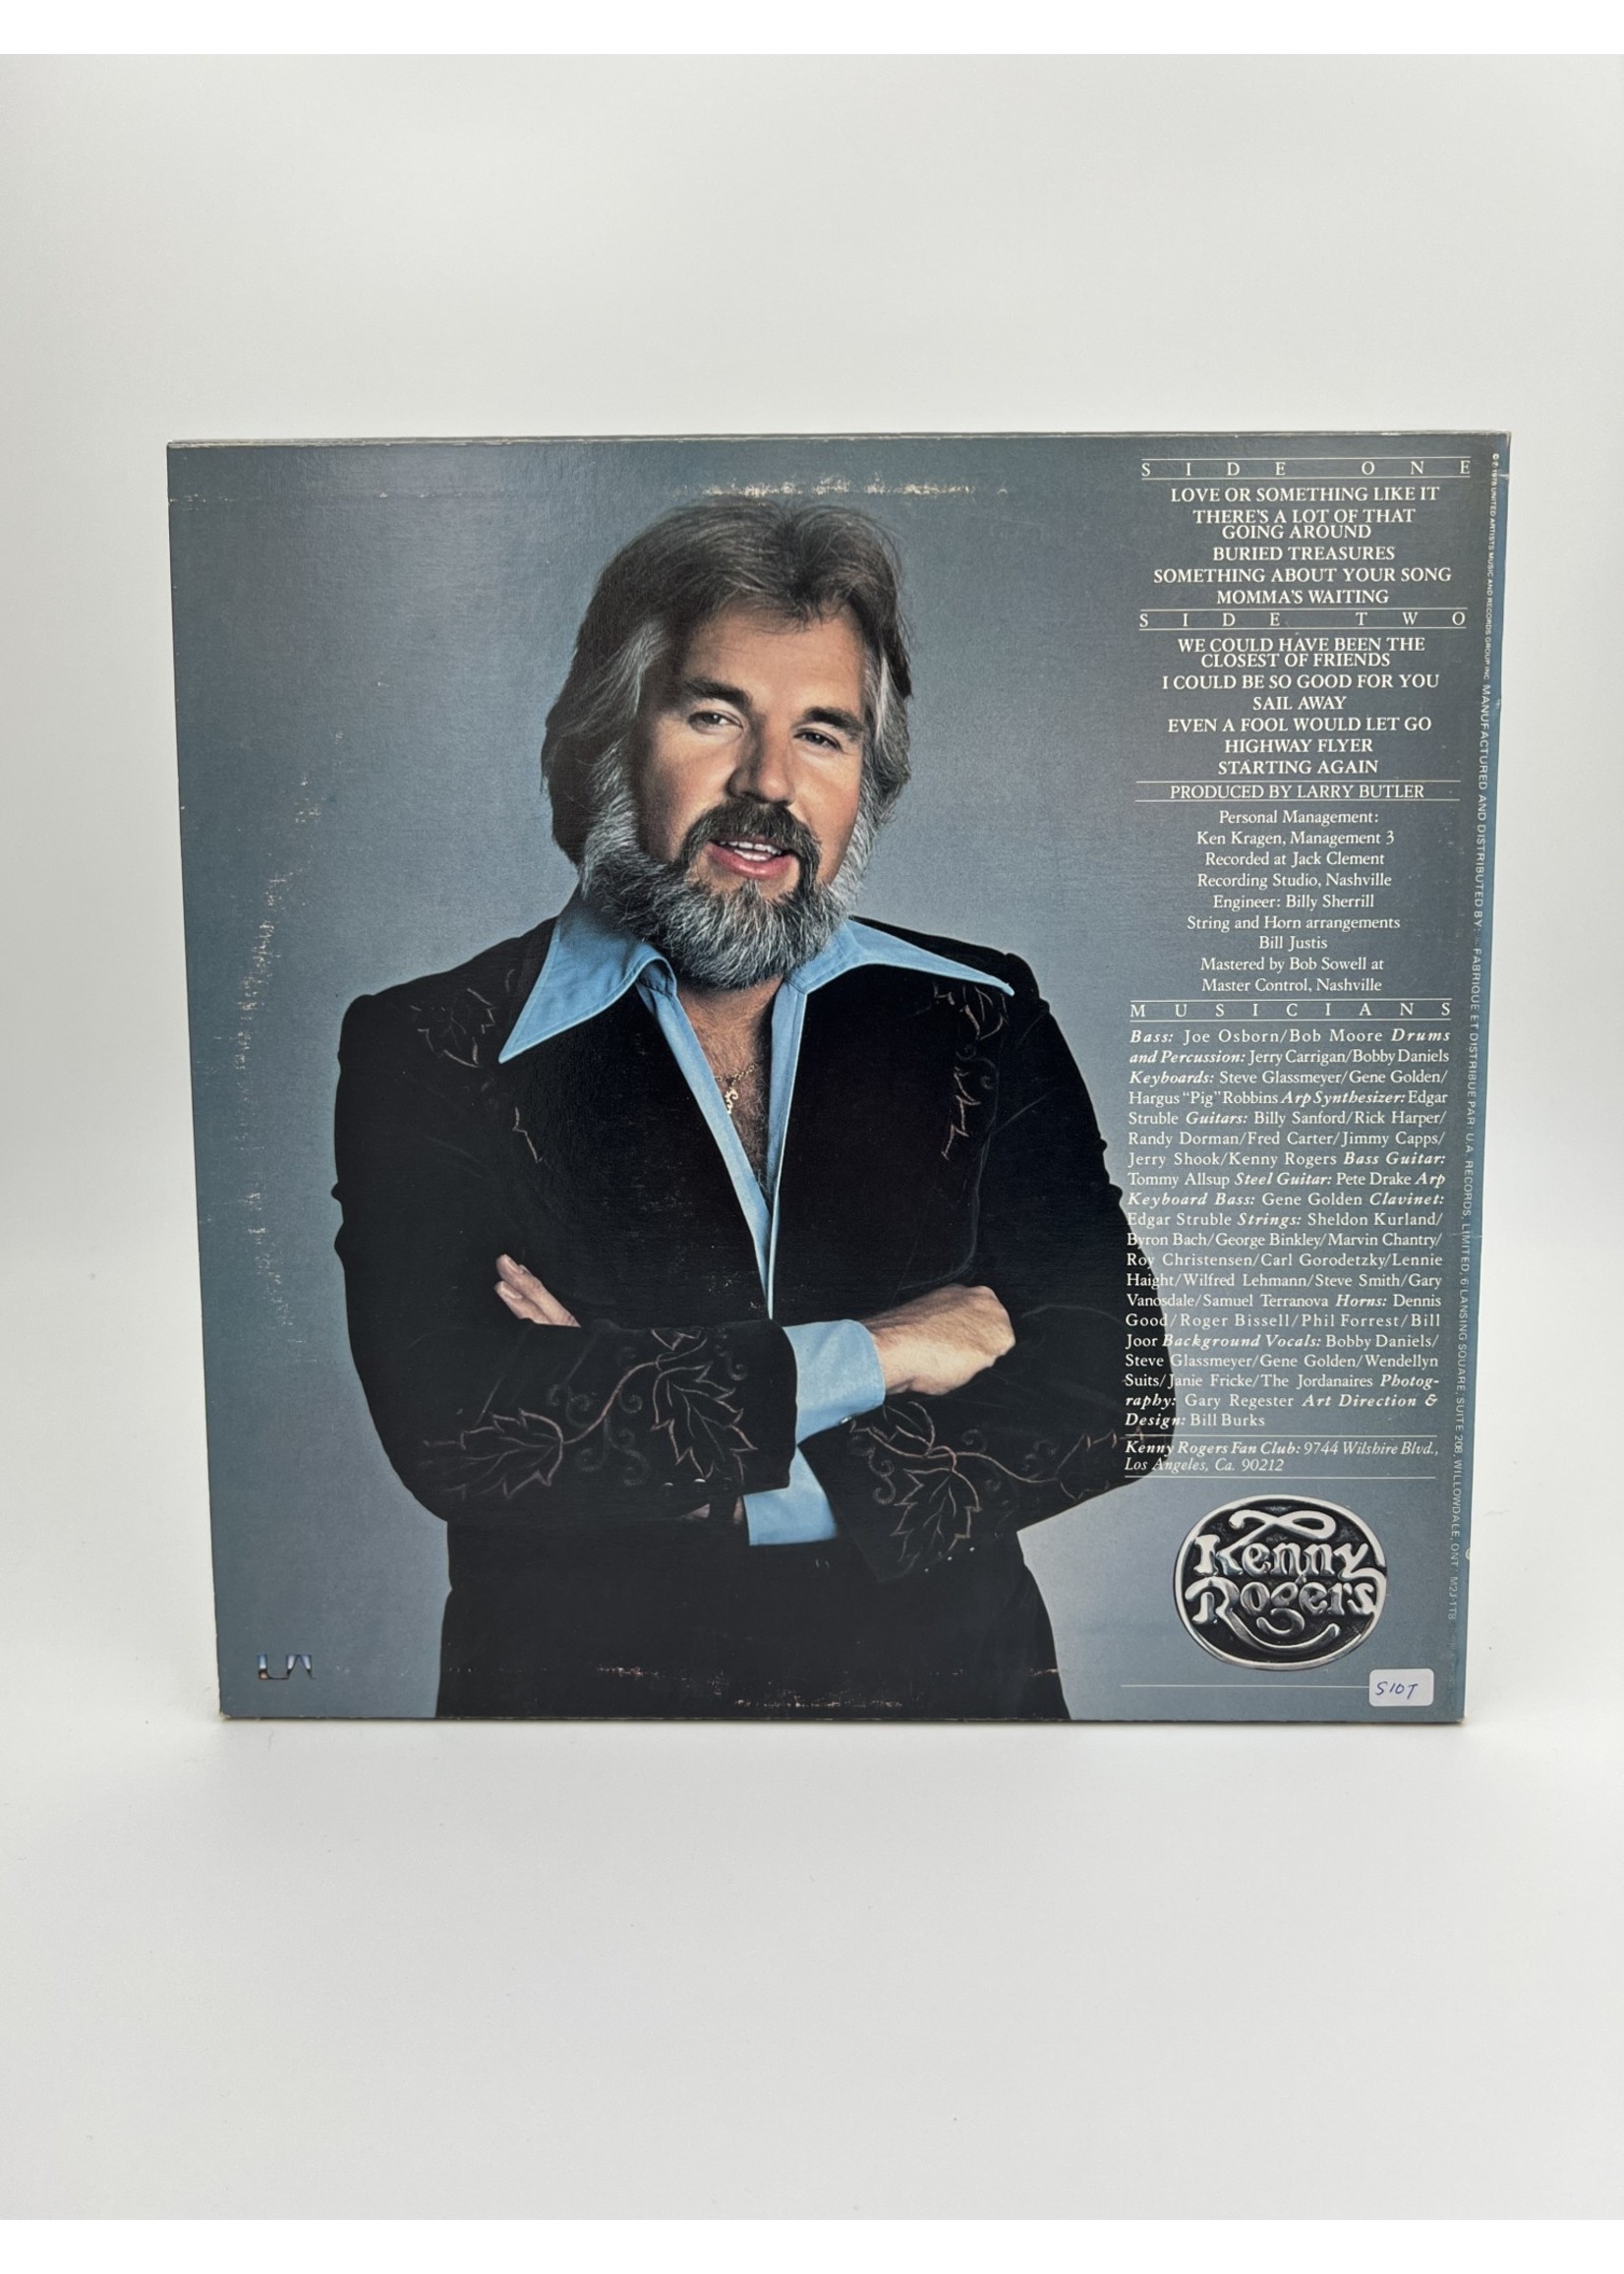 LP Kenny Rogers Love Or Something Like It LP RECORD